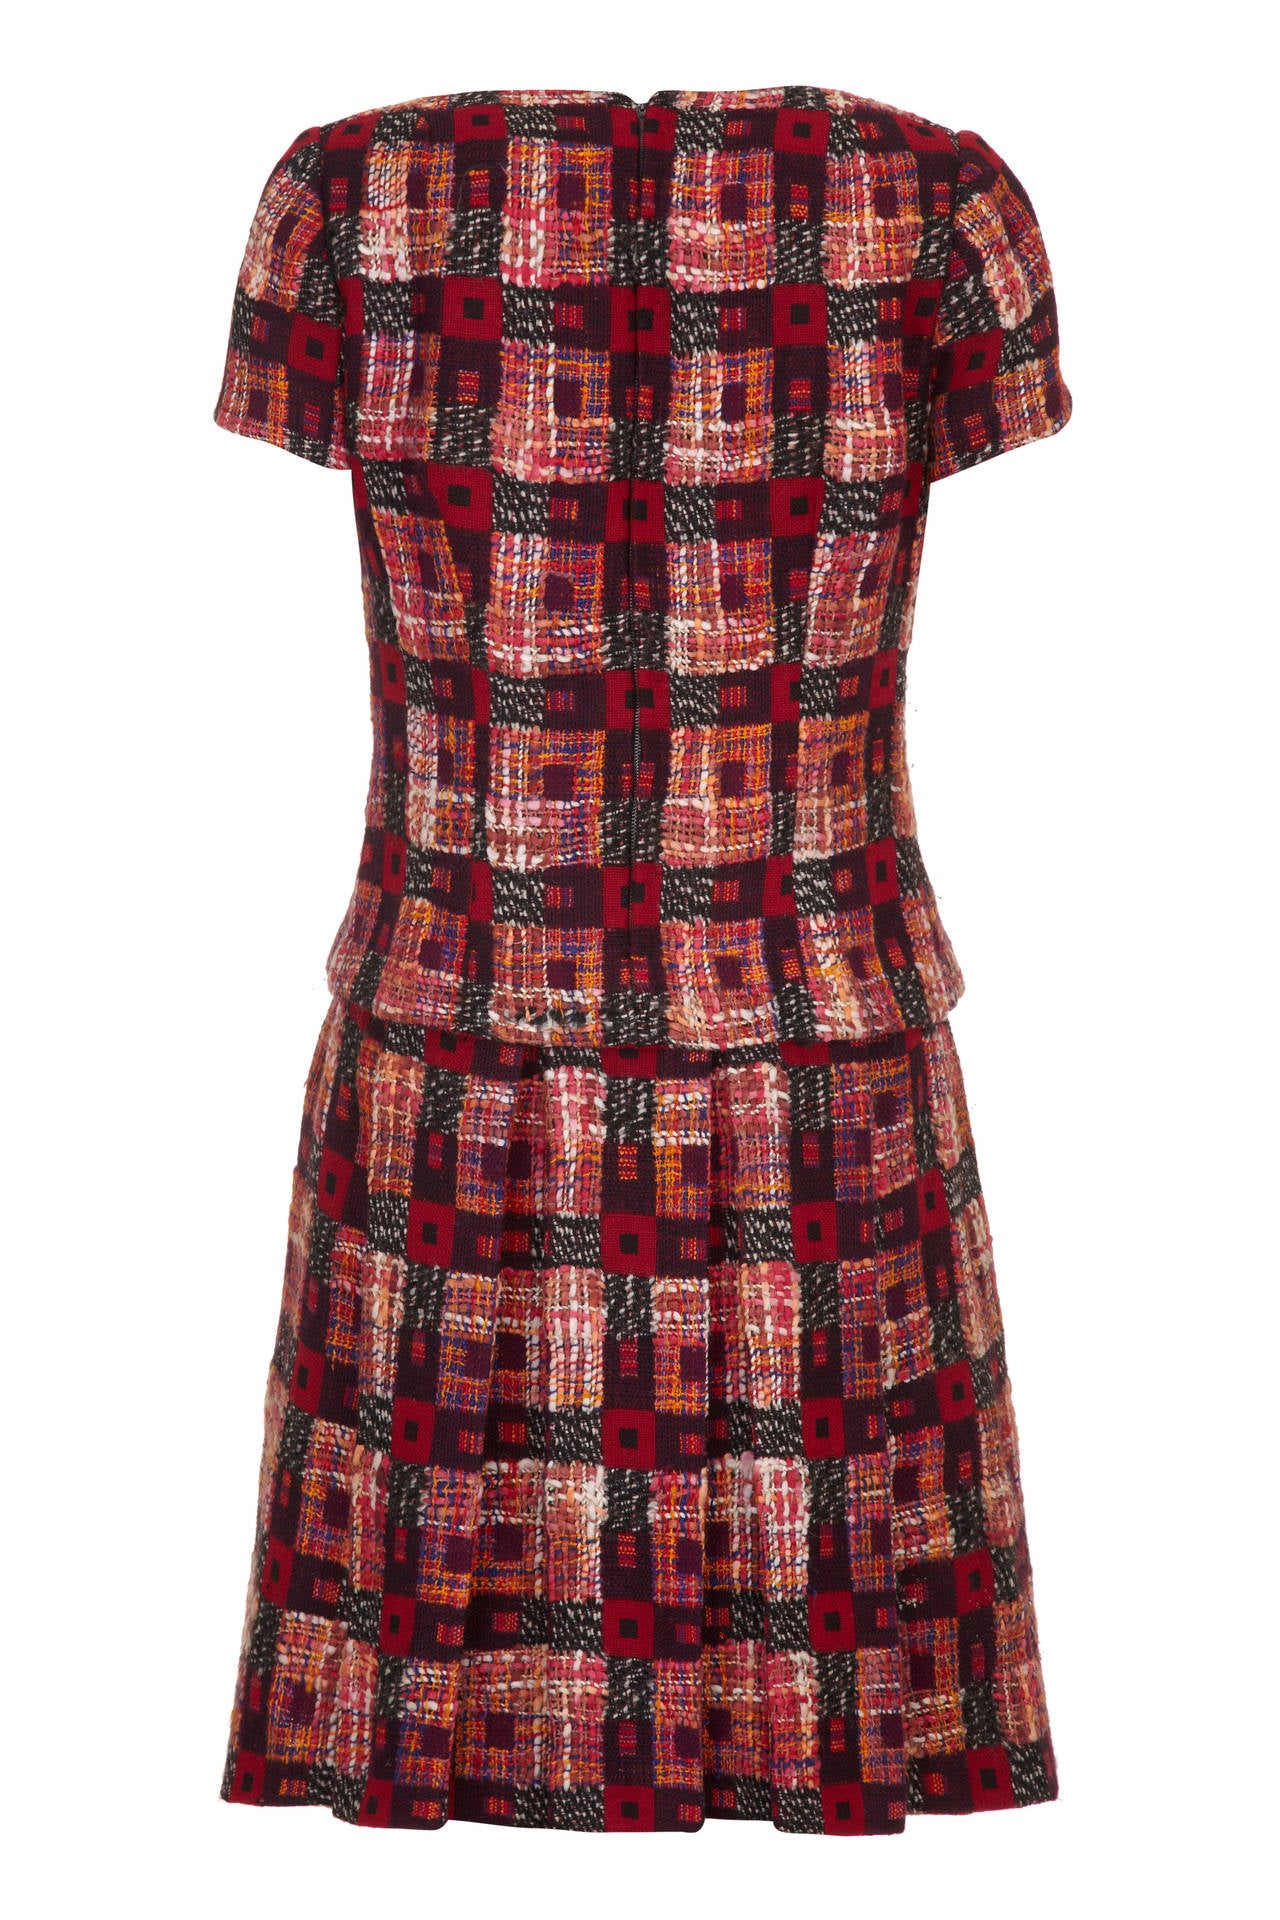 This charming 1960s fantasy wool tweed dress from Harrods in tones of deep red, russet and brown has the appearance of separates but is in fact one piece with a playful box pleat skirt attached to the lining of the bodice. It features short sleeves,